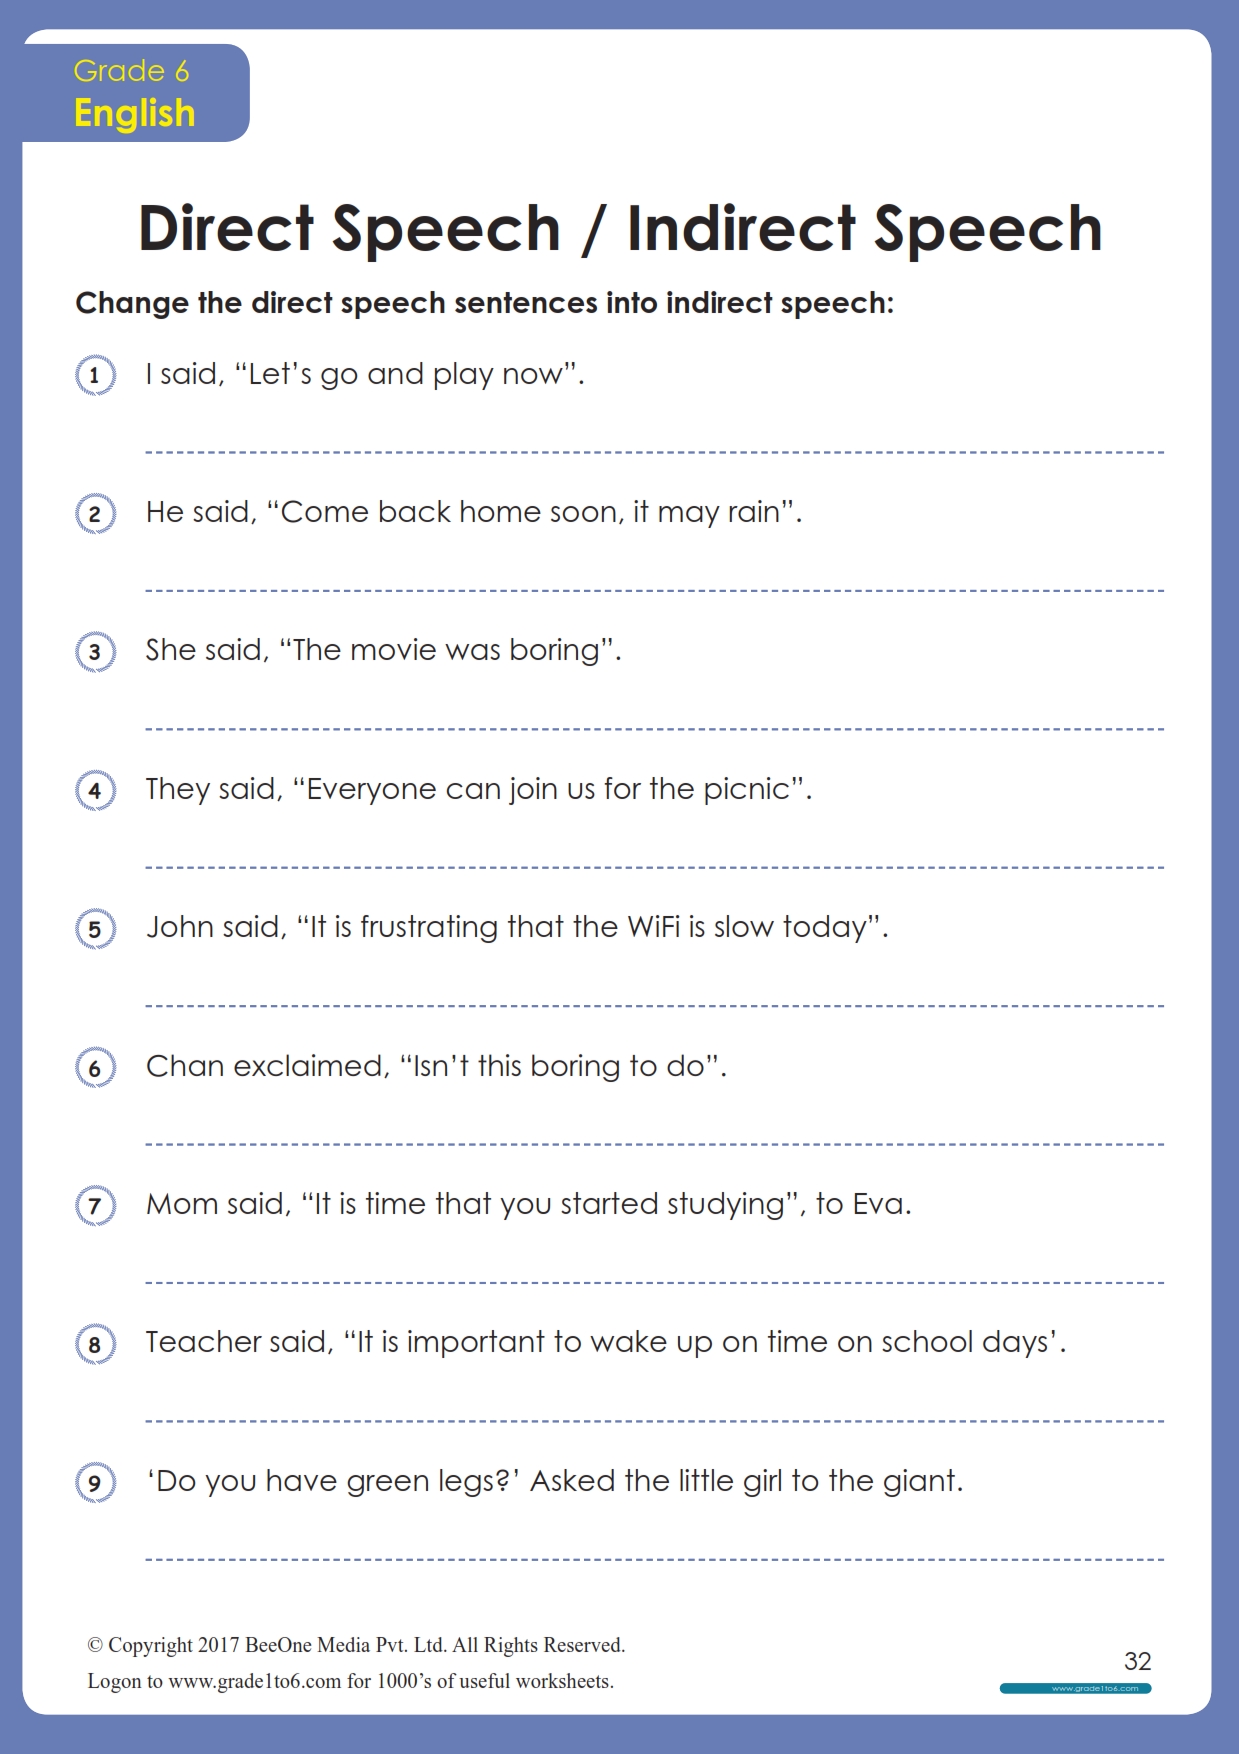 worksheet based on direct and indirect speech